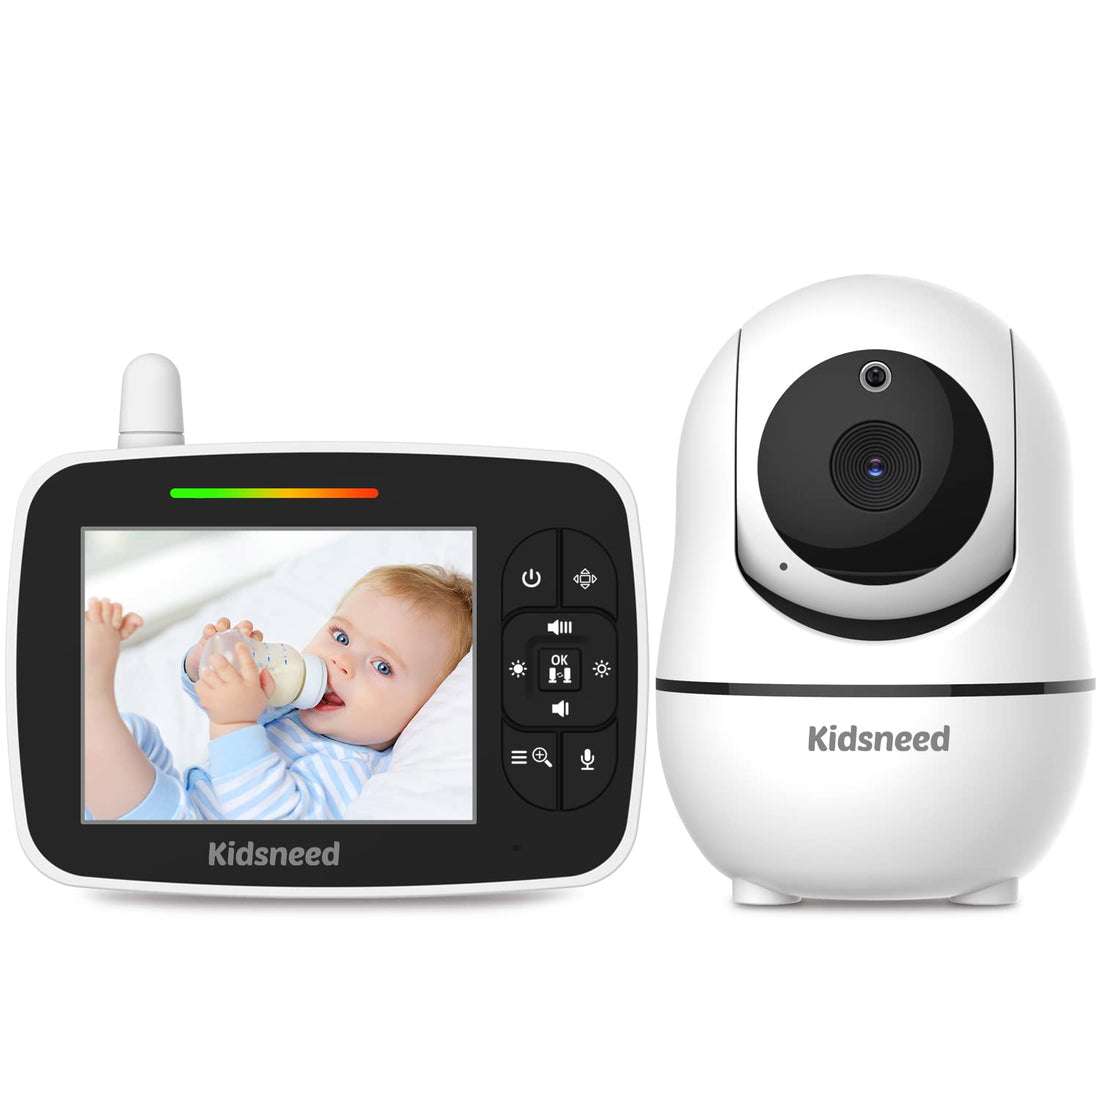 Baby Monitor, 3.5" Screen Video Baby Monitor with Camera and Audio, 2 Zoom in, Night Vision, VOX Mode, Temperature Monitoring, Lullabies, 2-Way Talk, Feeding Alarm Clock